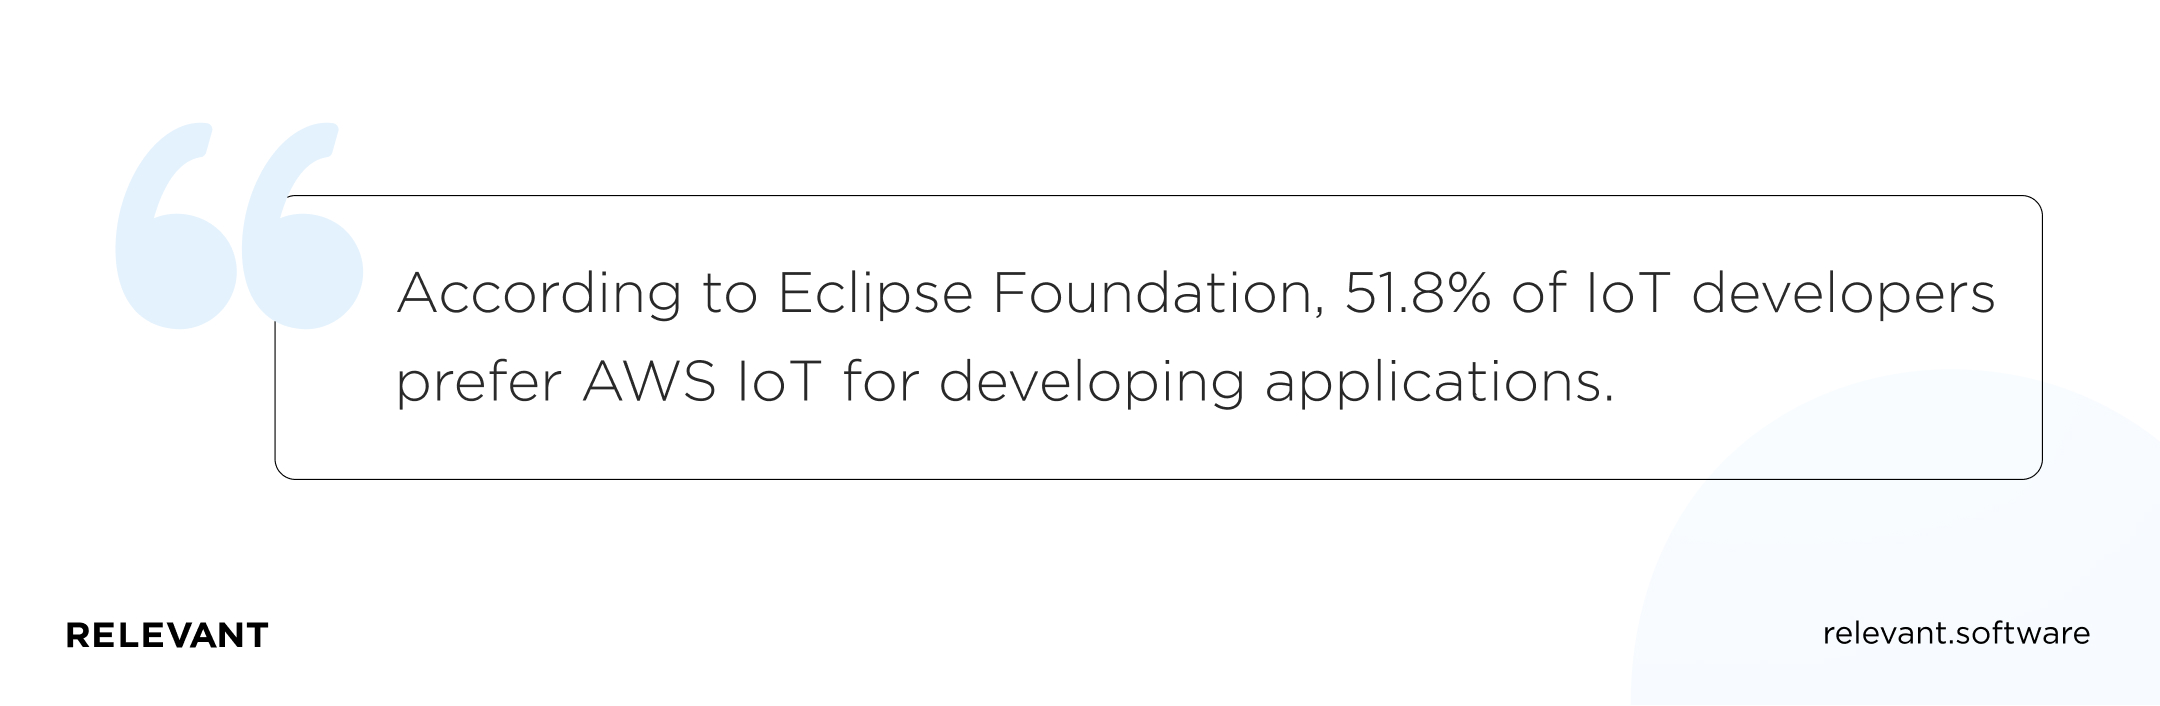 51.8% AWS IoT for developing applications